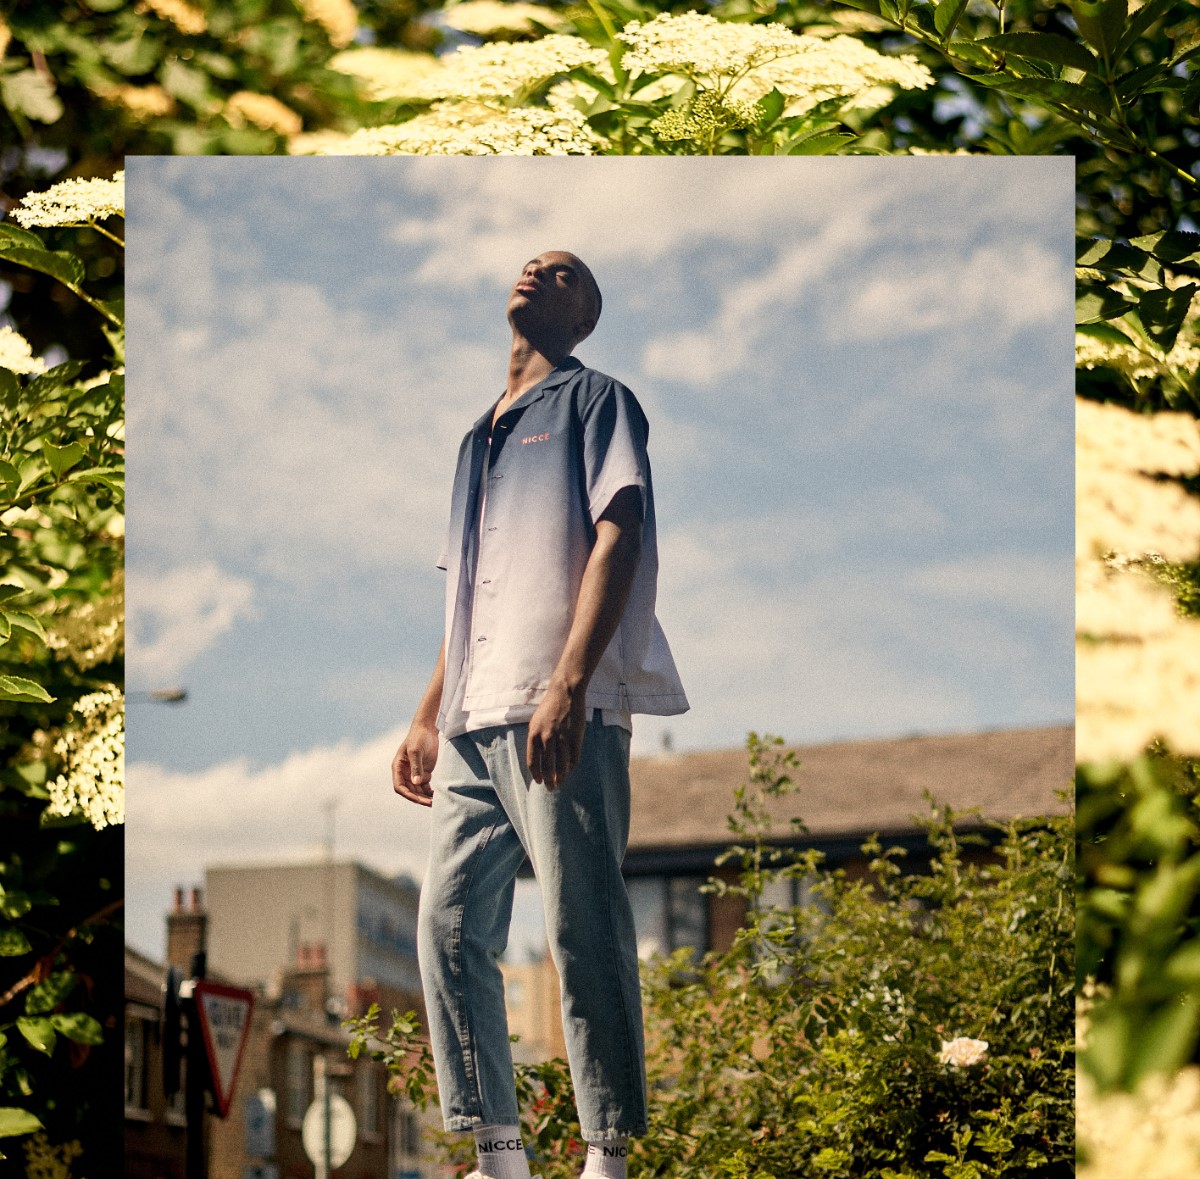 NICCE heads to the Local Park for Latest Editorial